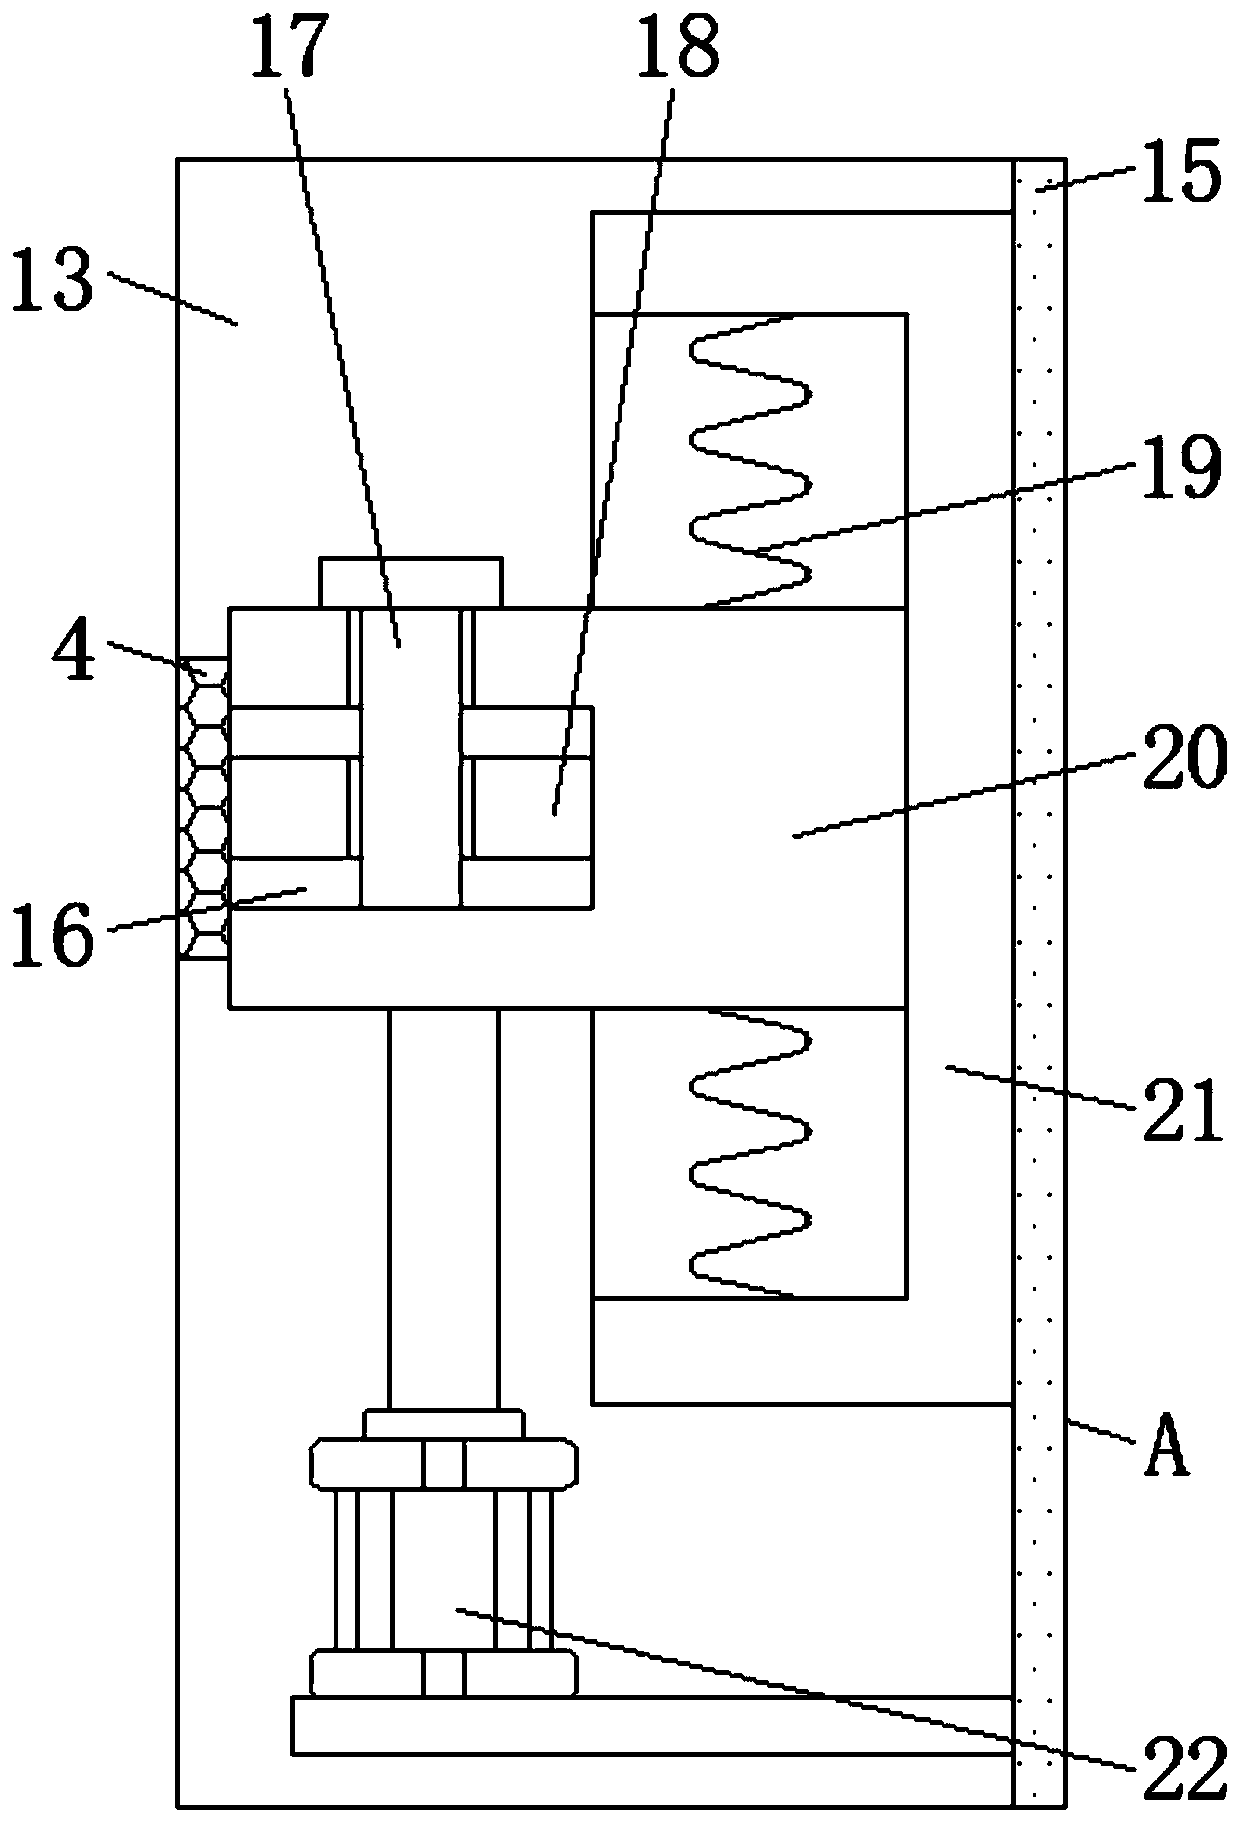 Low-oxygen flameless heat storage type combustion device